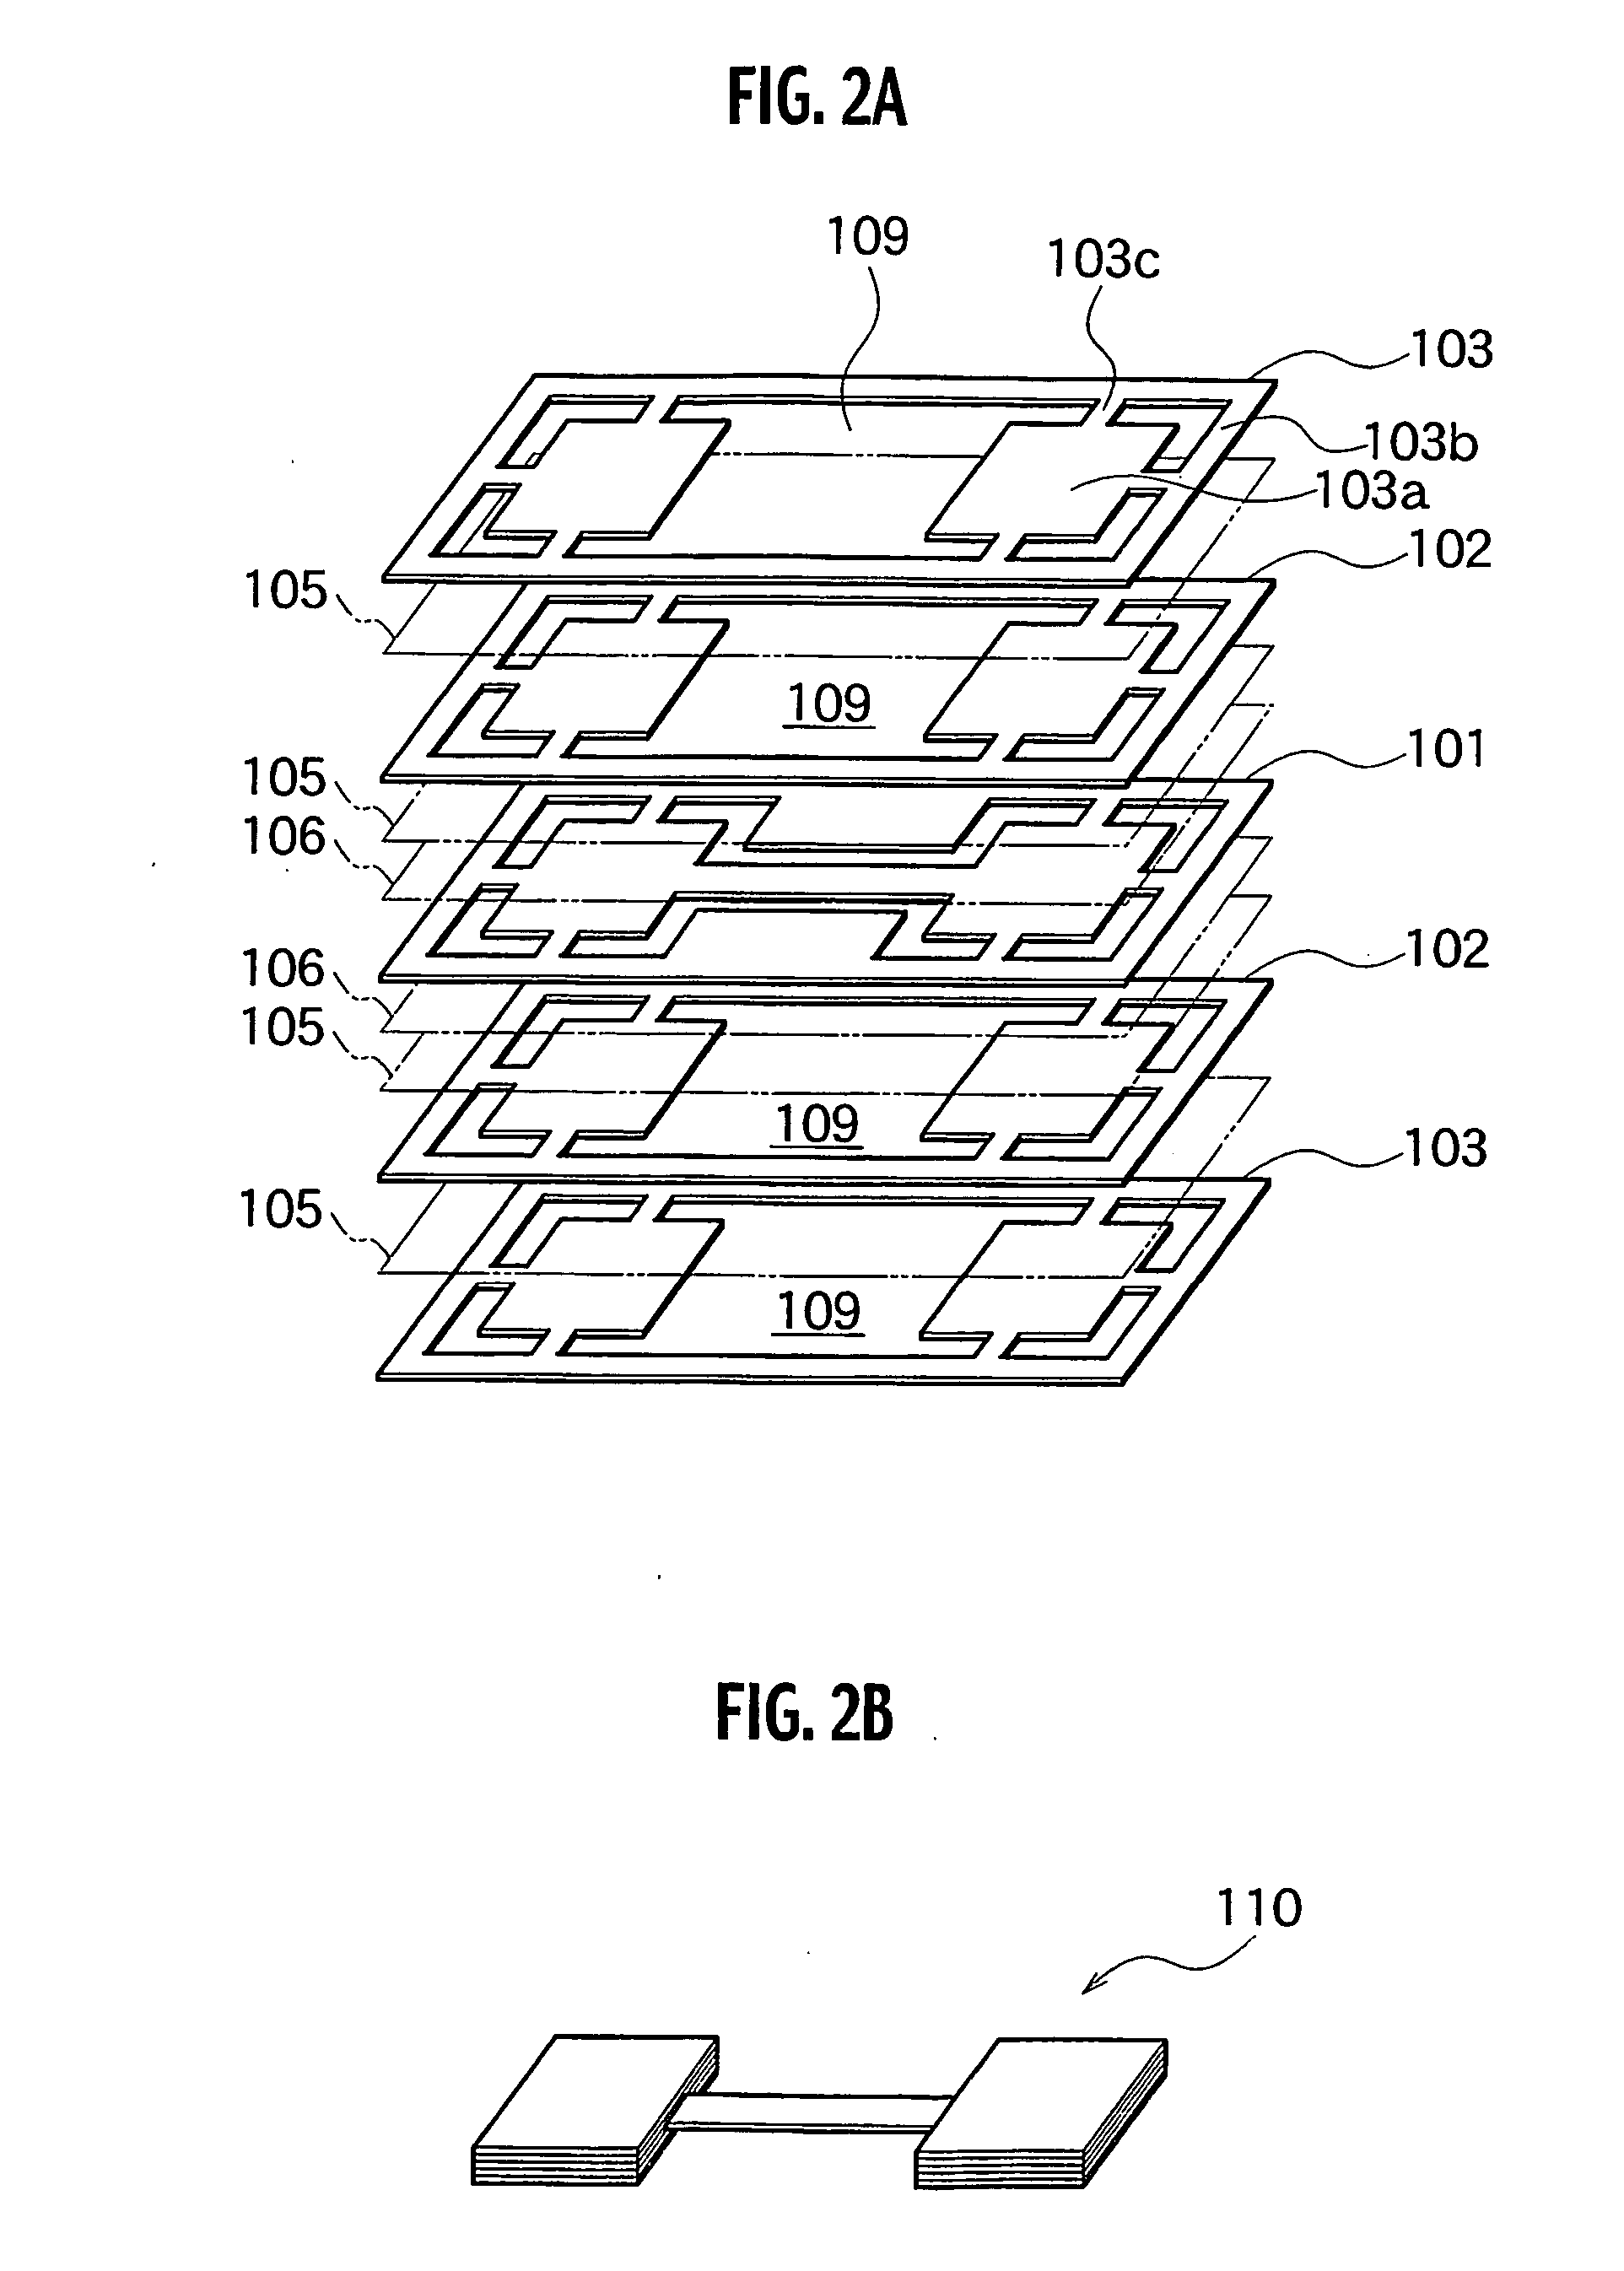 Multilayer printed wiring board and process for producing the same